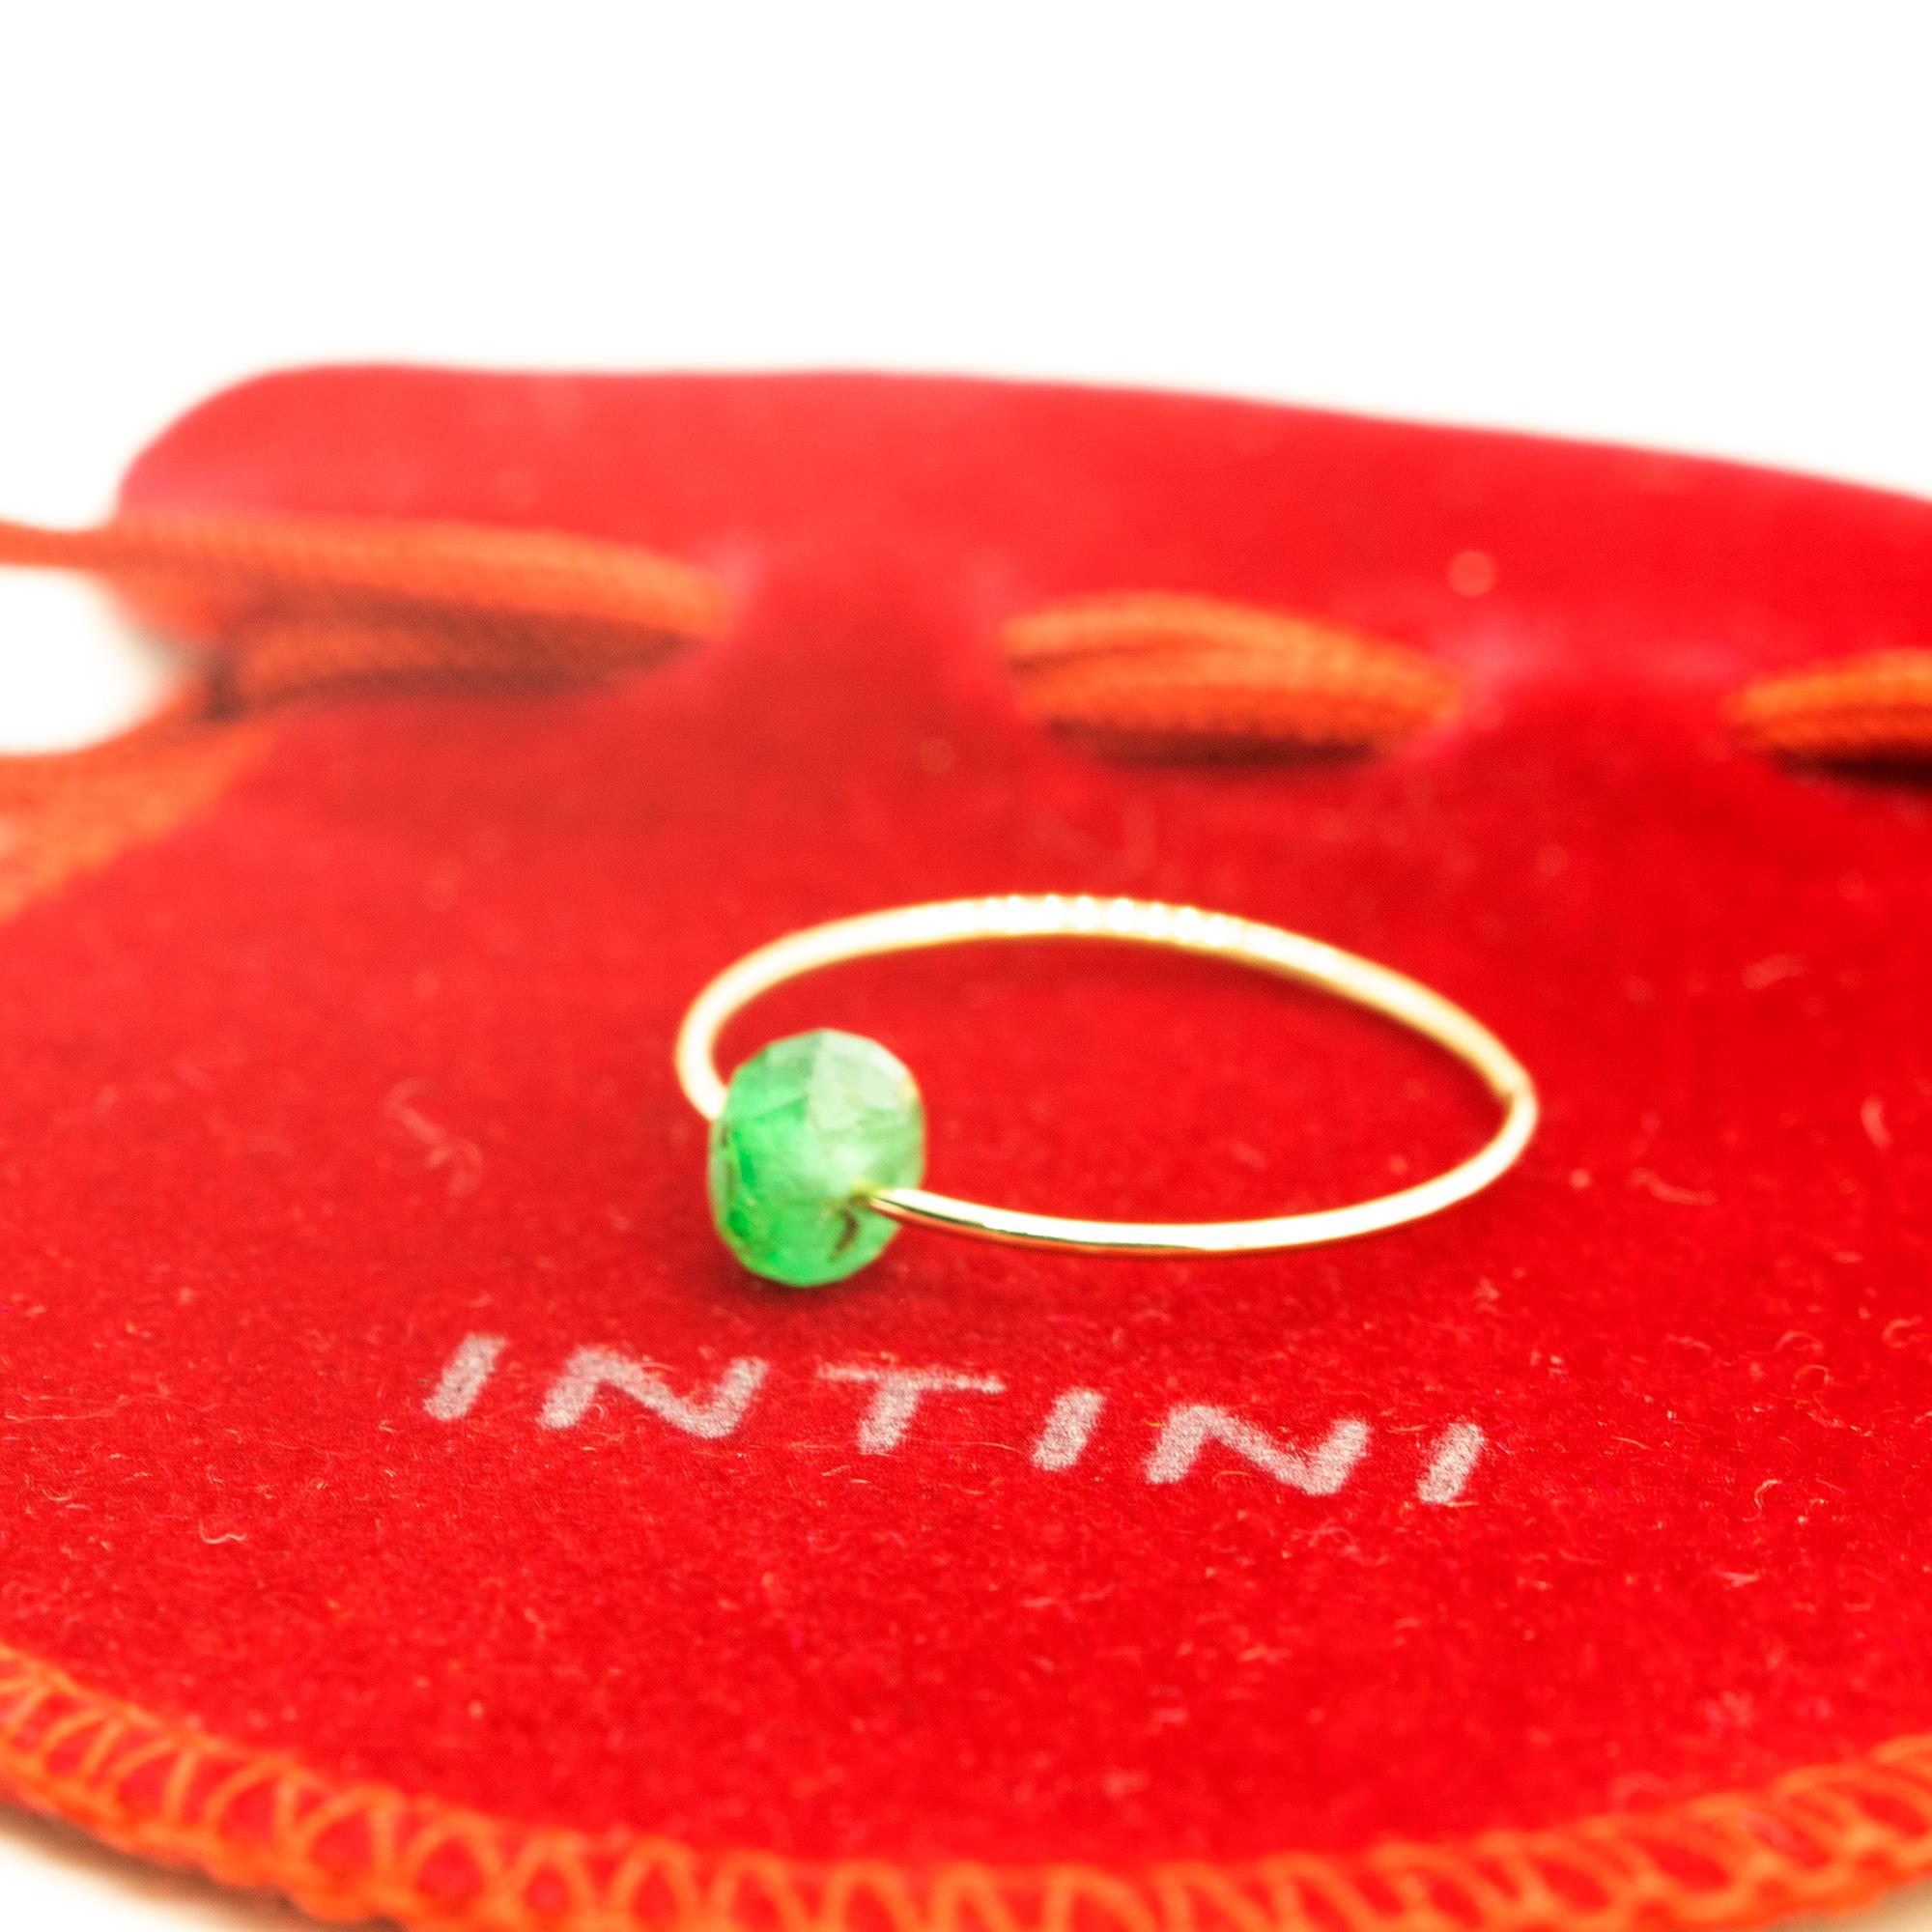 Signature INTINI Jewels Planet ring. Contemporary ring design in 18 karat yellow gold.  Passion and intensity mixed in one jewel. Delight yourself with a strong, minimalist design, just for a stunning chic look. This fancy design is made for a woman